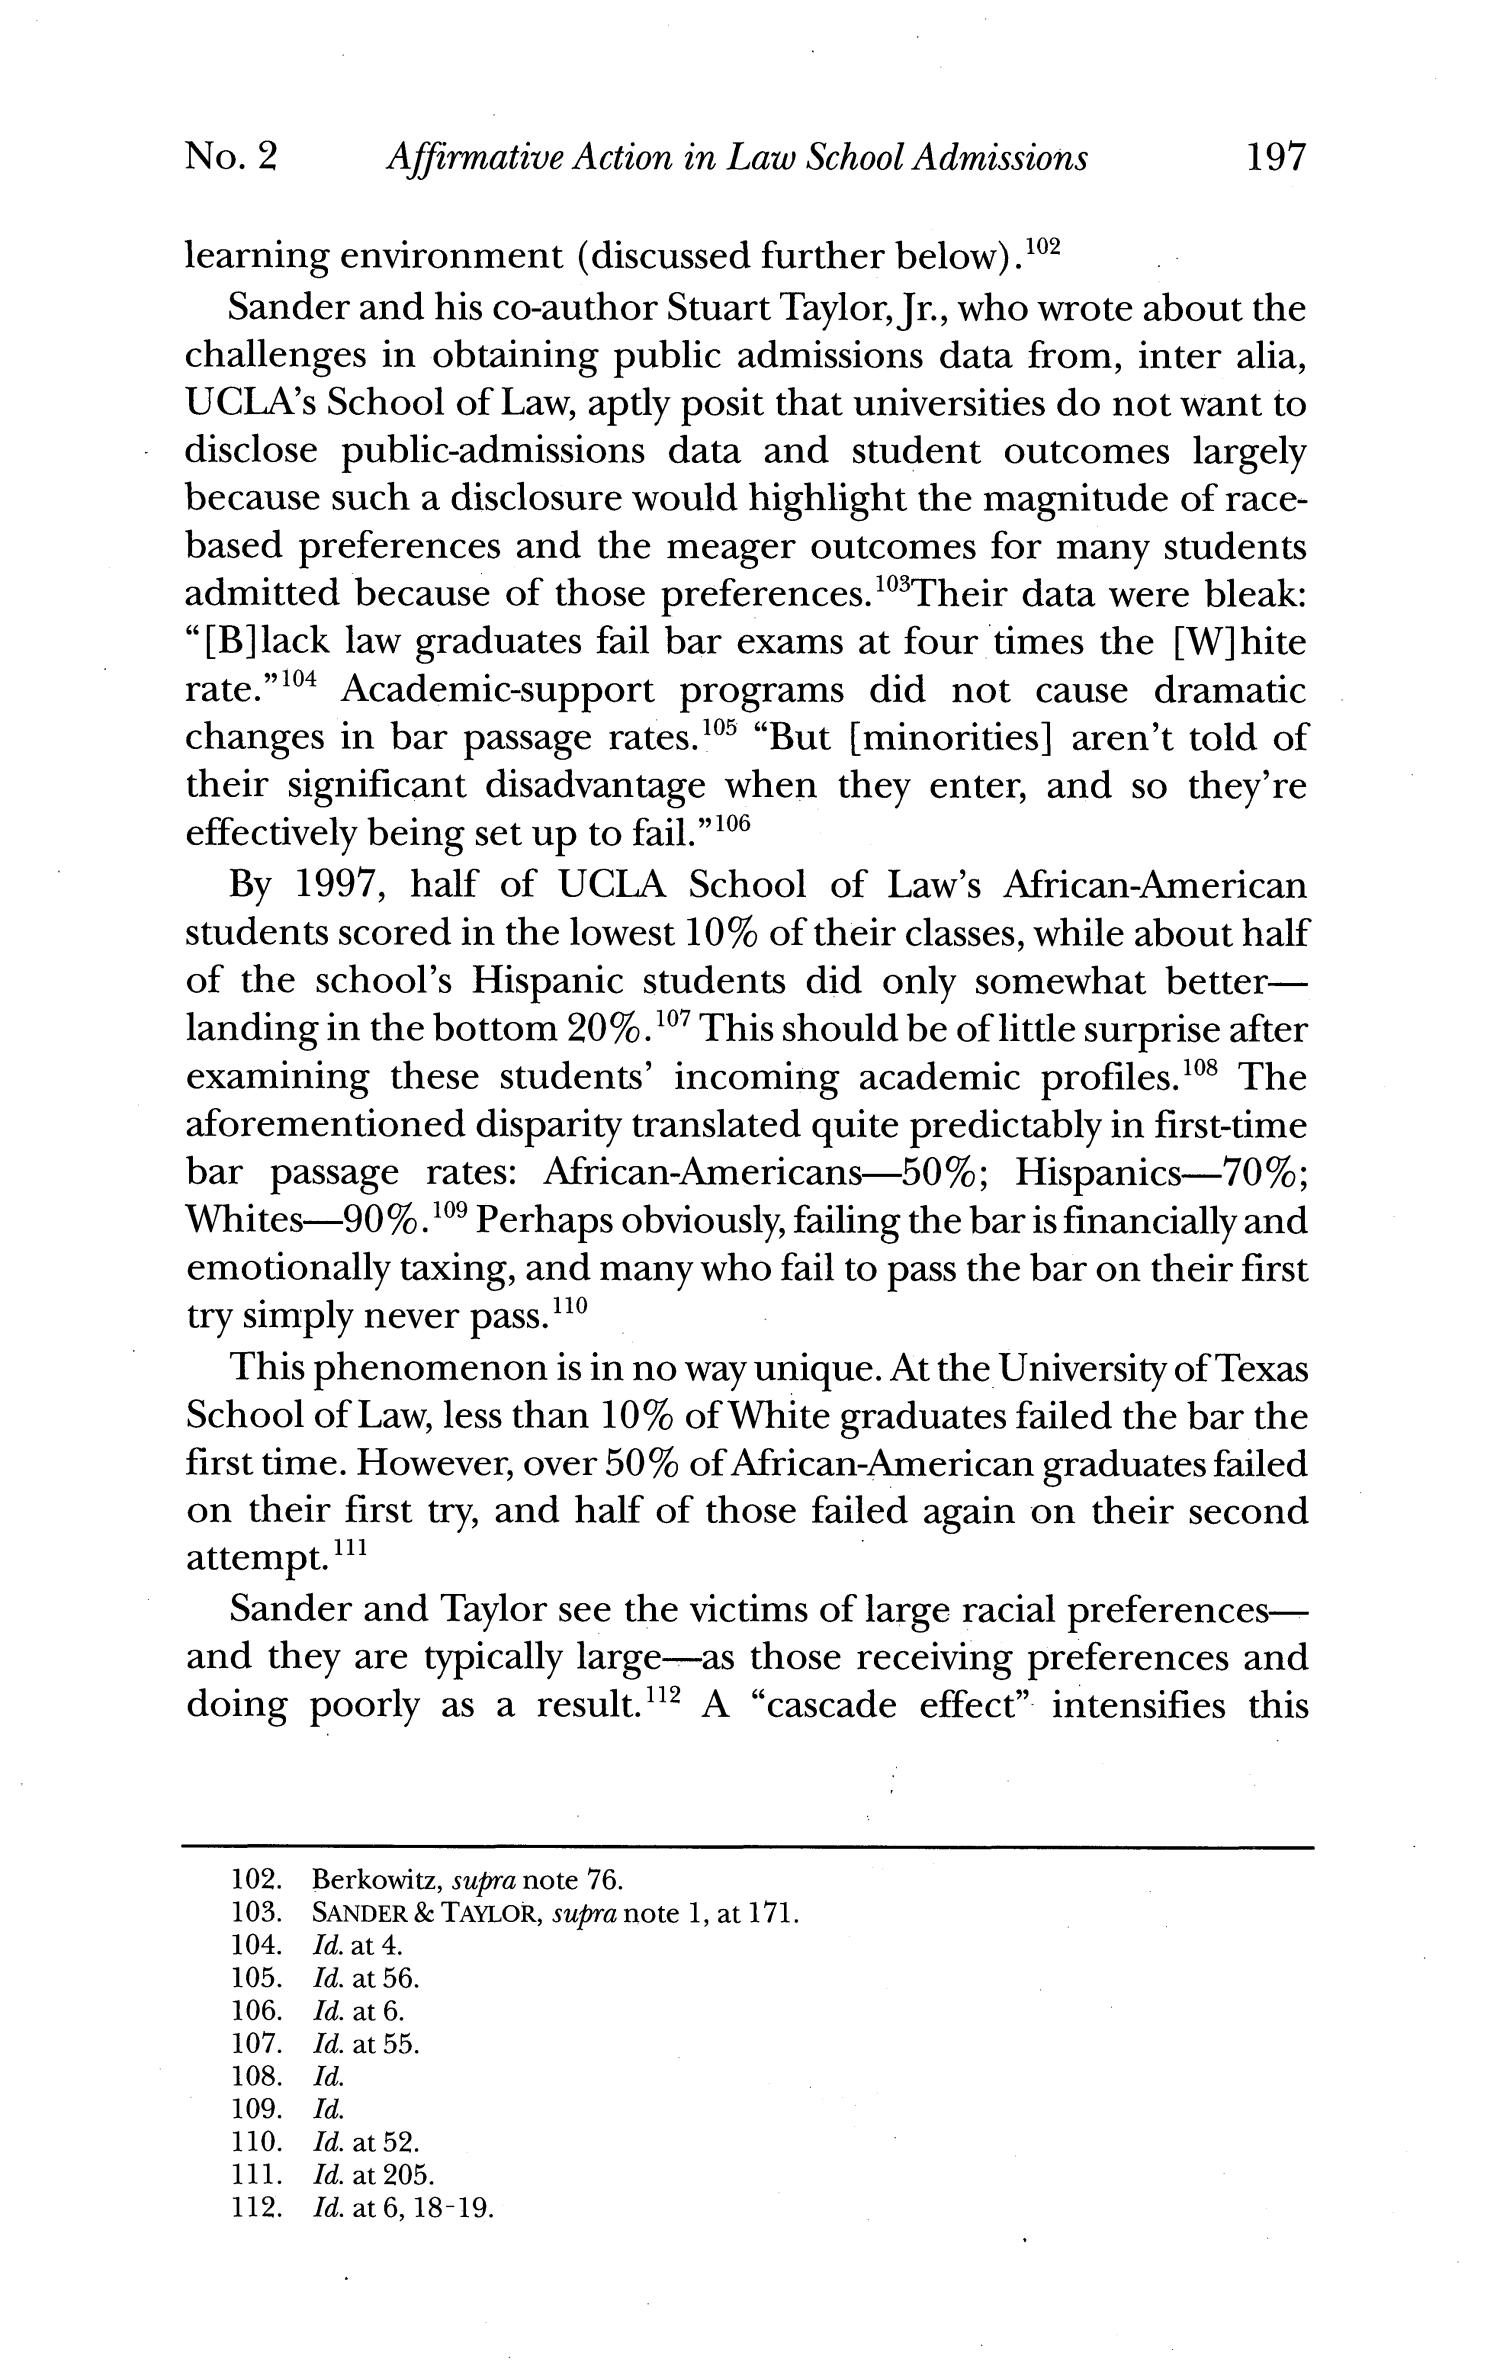 Texas Review of Law & Politics, Volume 20, Number 2, Spring 2016
                                                
                                                    197
                                                